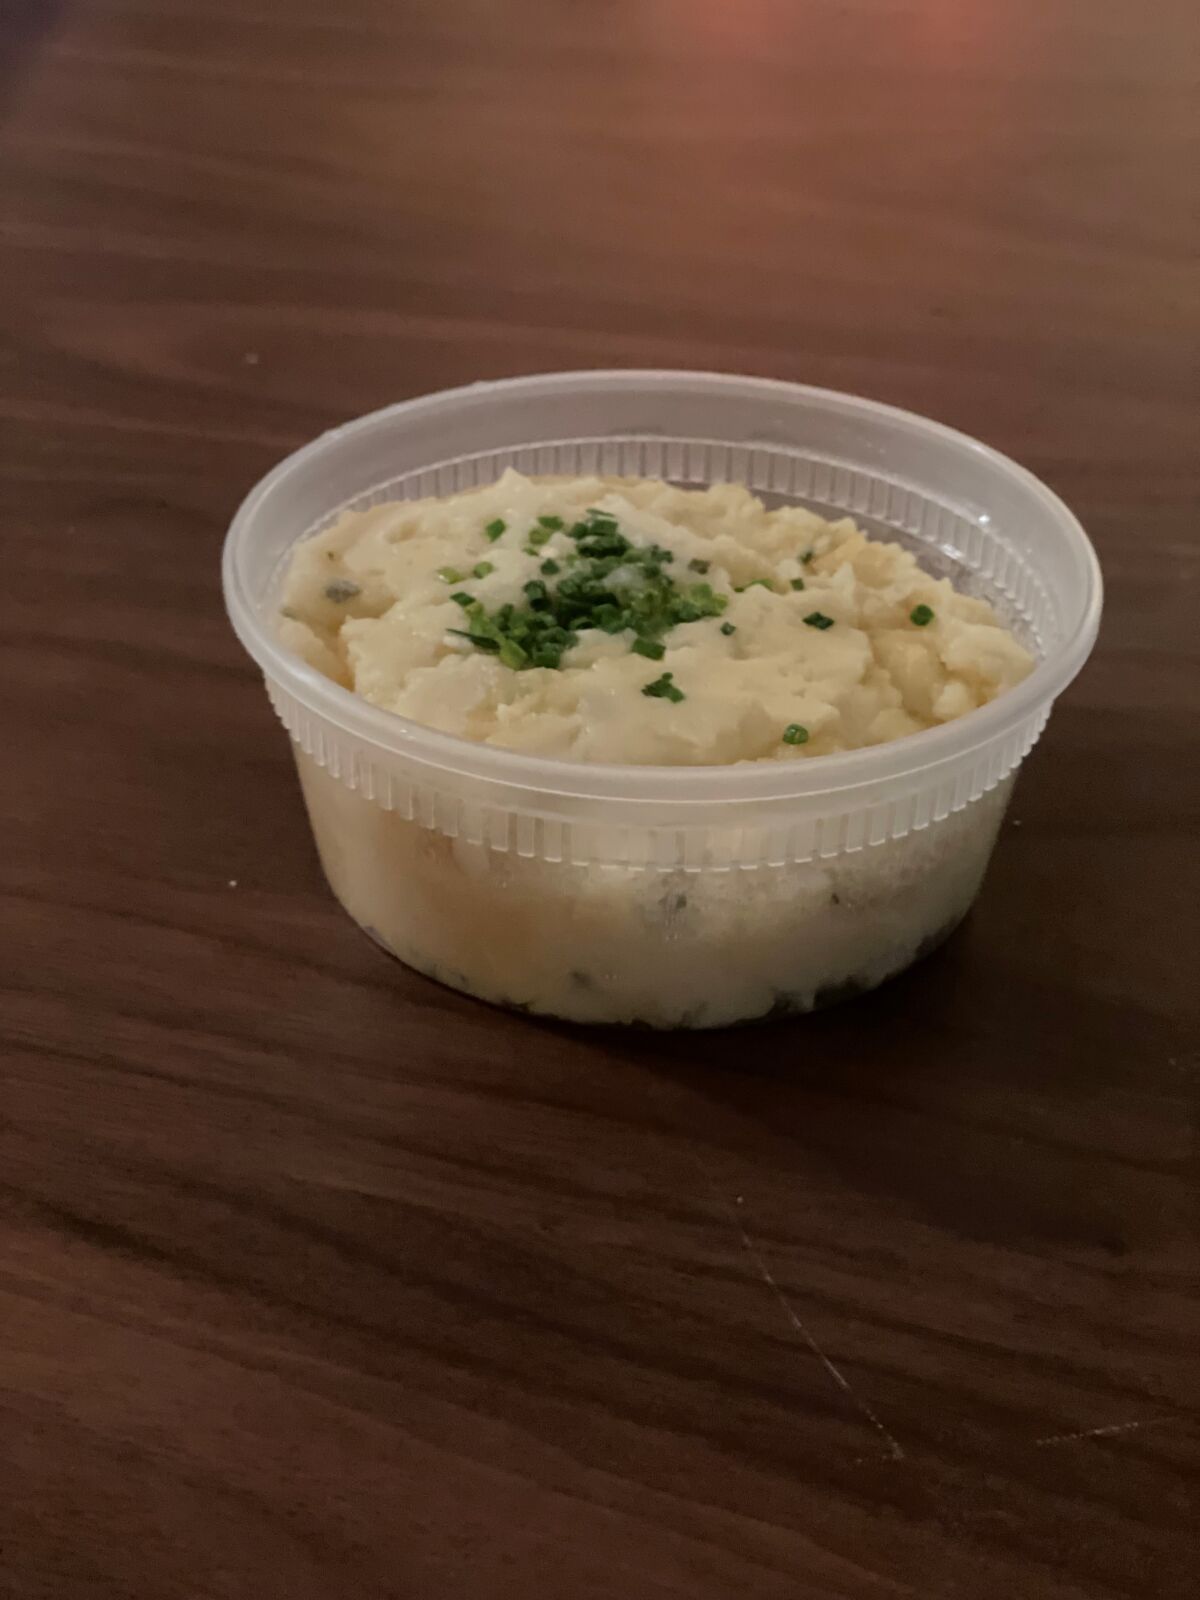 Cheddar Chive Mashed Potatoes from Beaumont's in Bird Rock